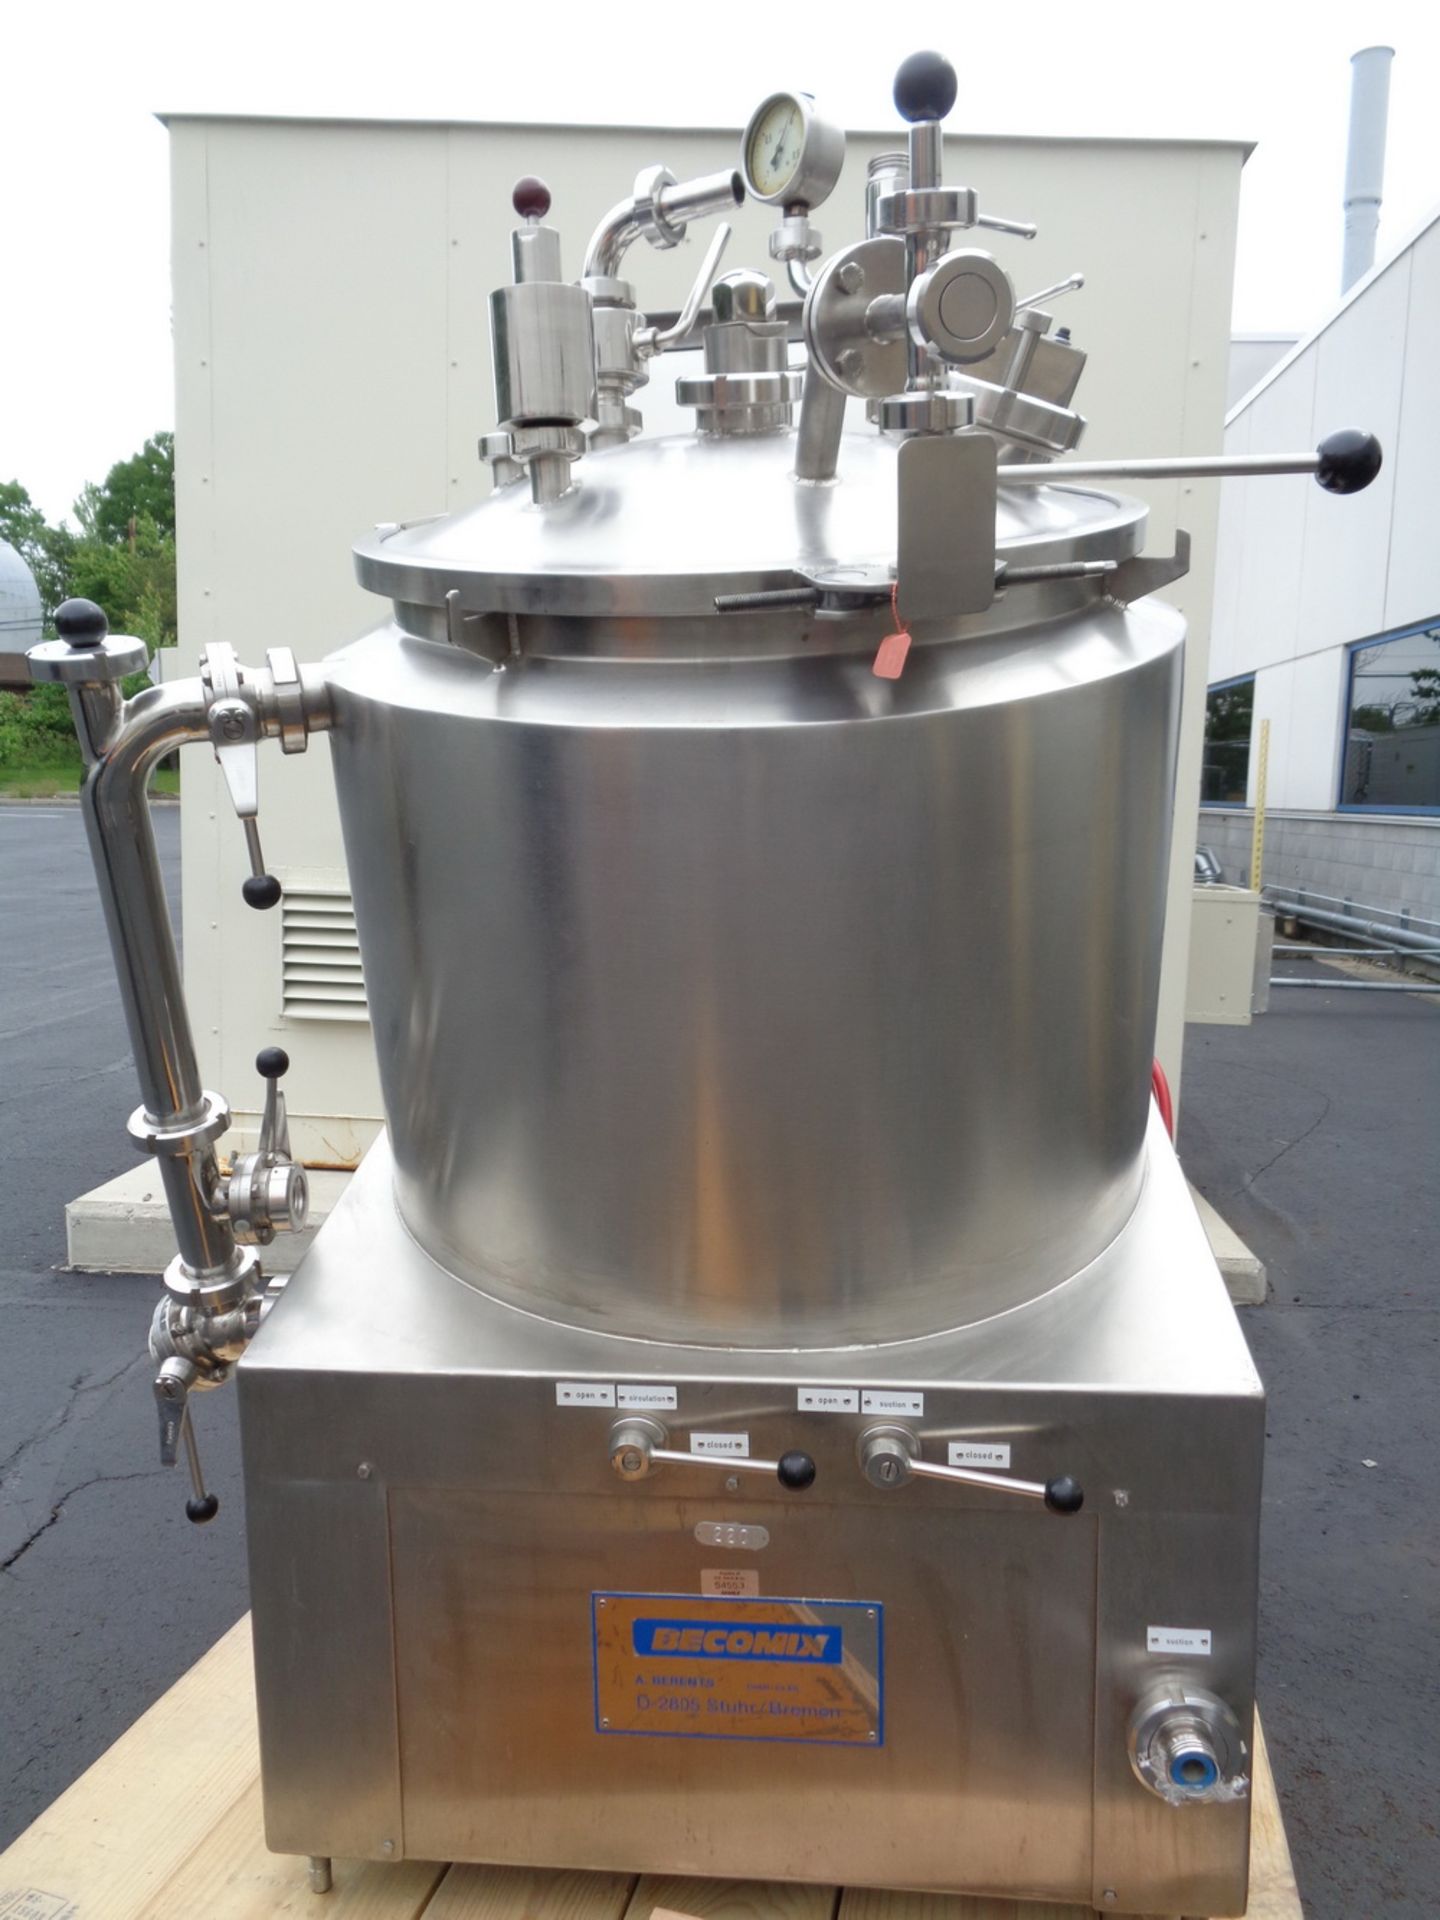 Becomix 125 Liter Stainless Steel Homogenizing/Scraper Jacketed Mixing System, Model D-2805